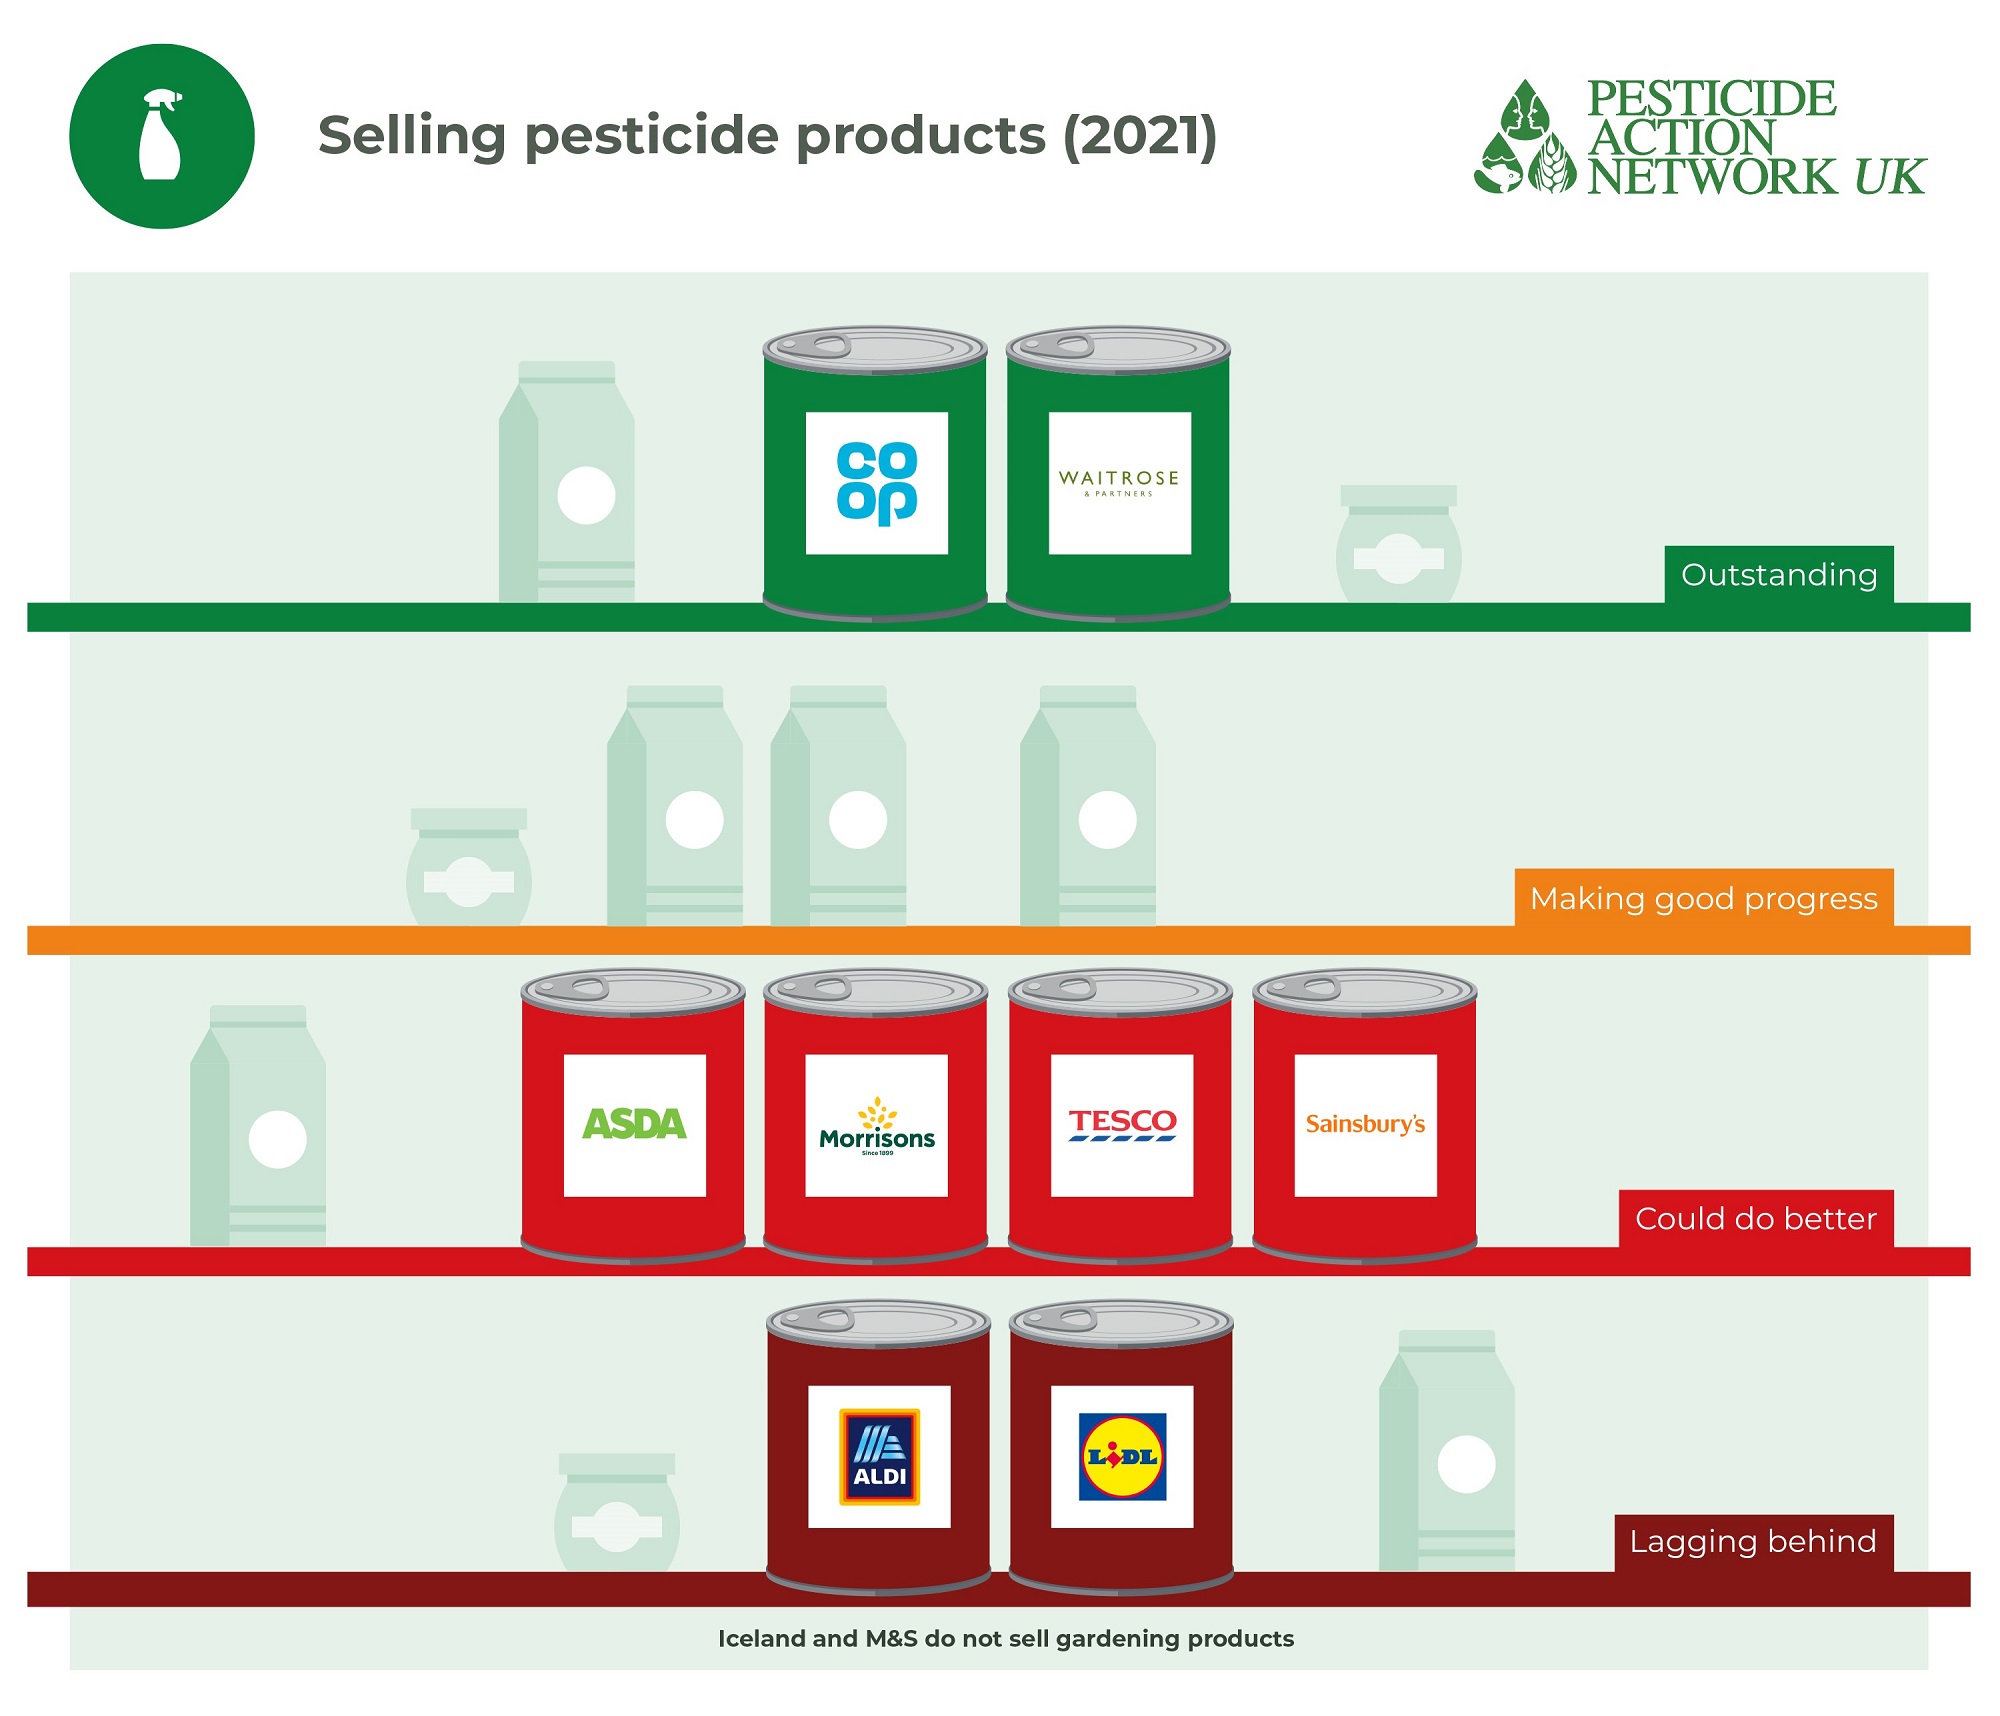 Are supermarkets still selling pesticide products?